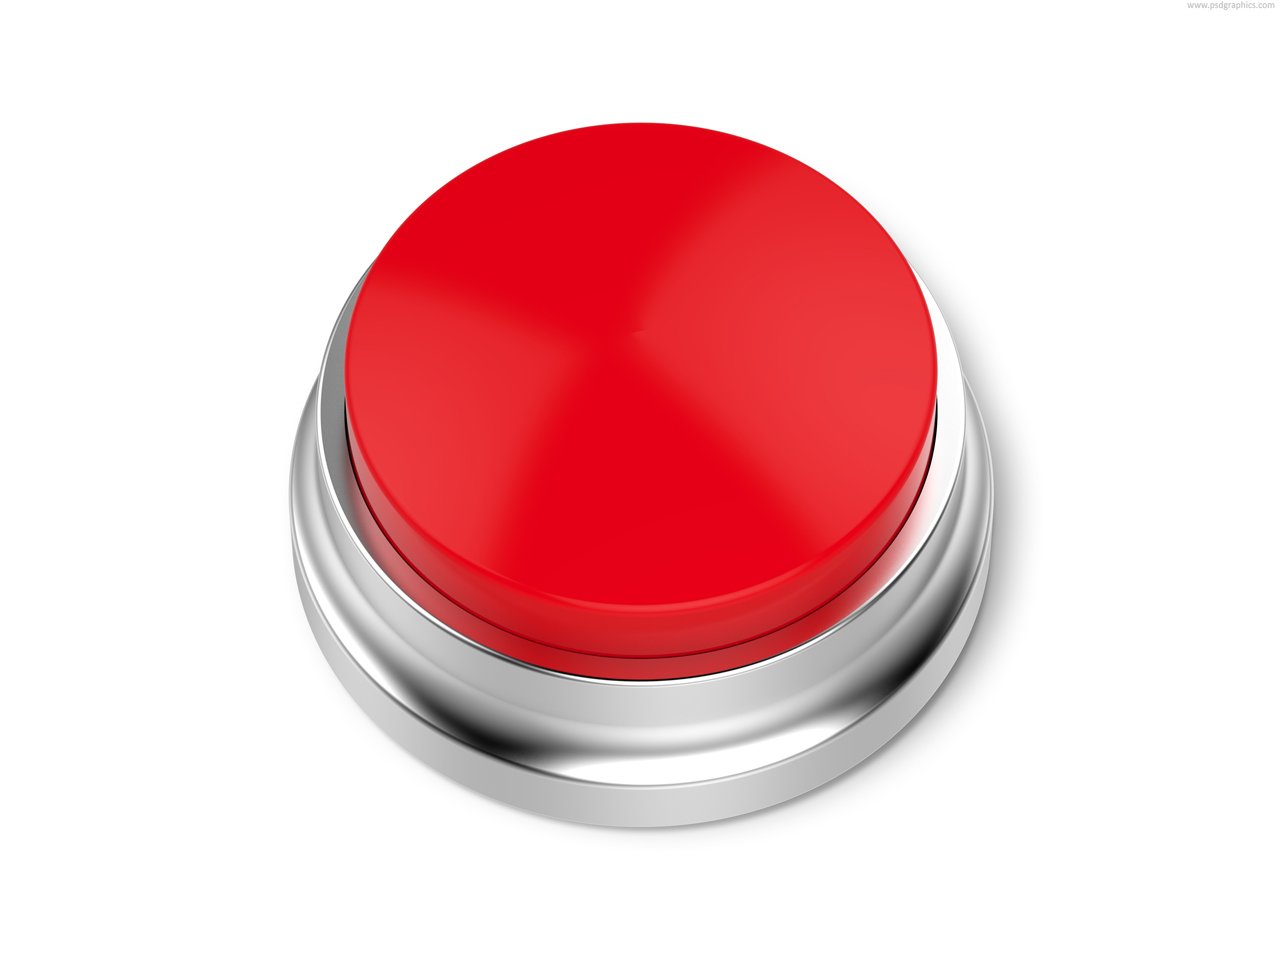 push the red button